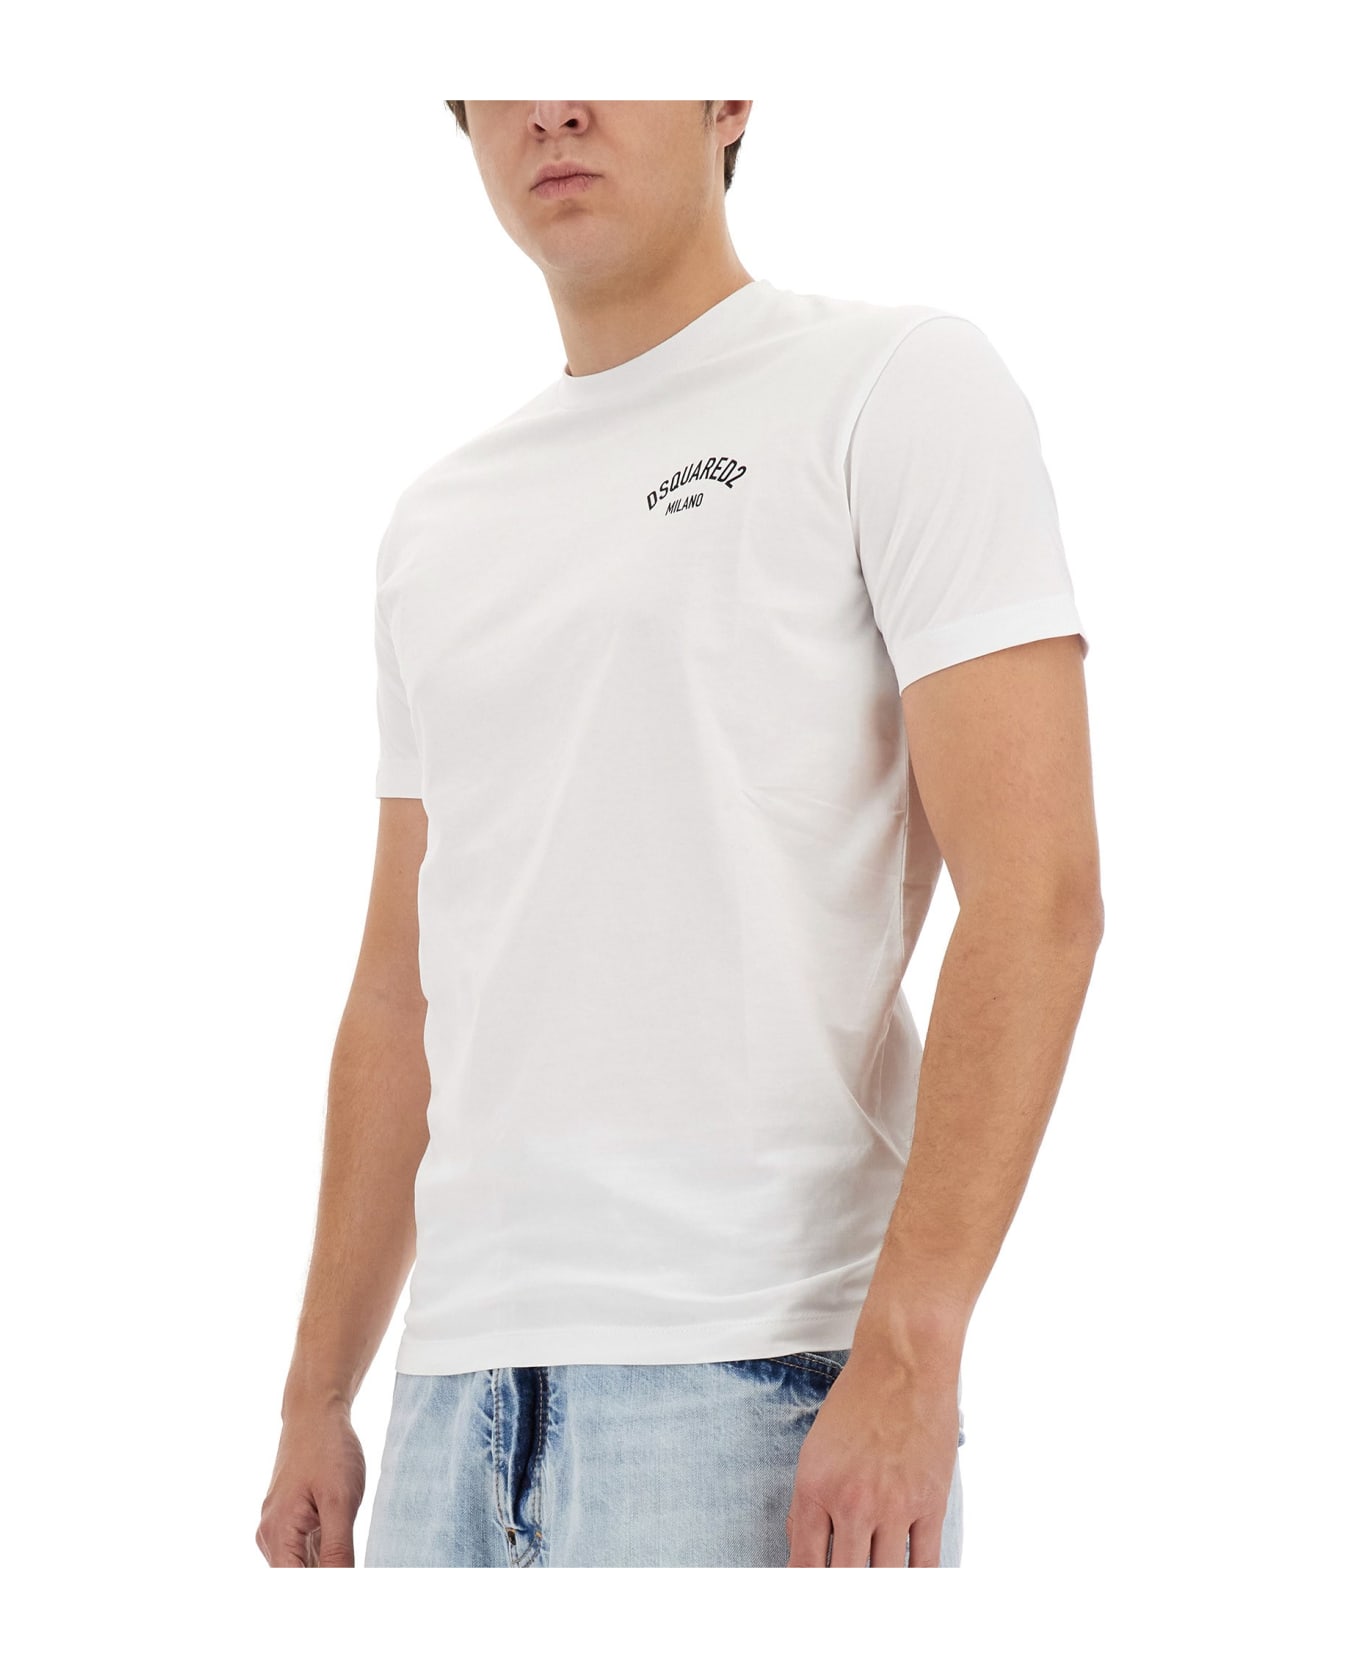 Dsquared2 Cool Fit T-shirt - White シャツ